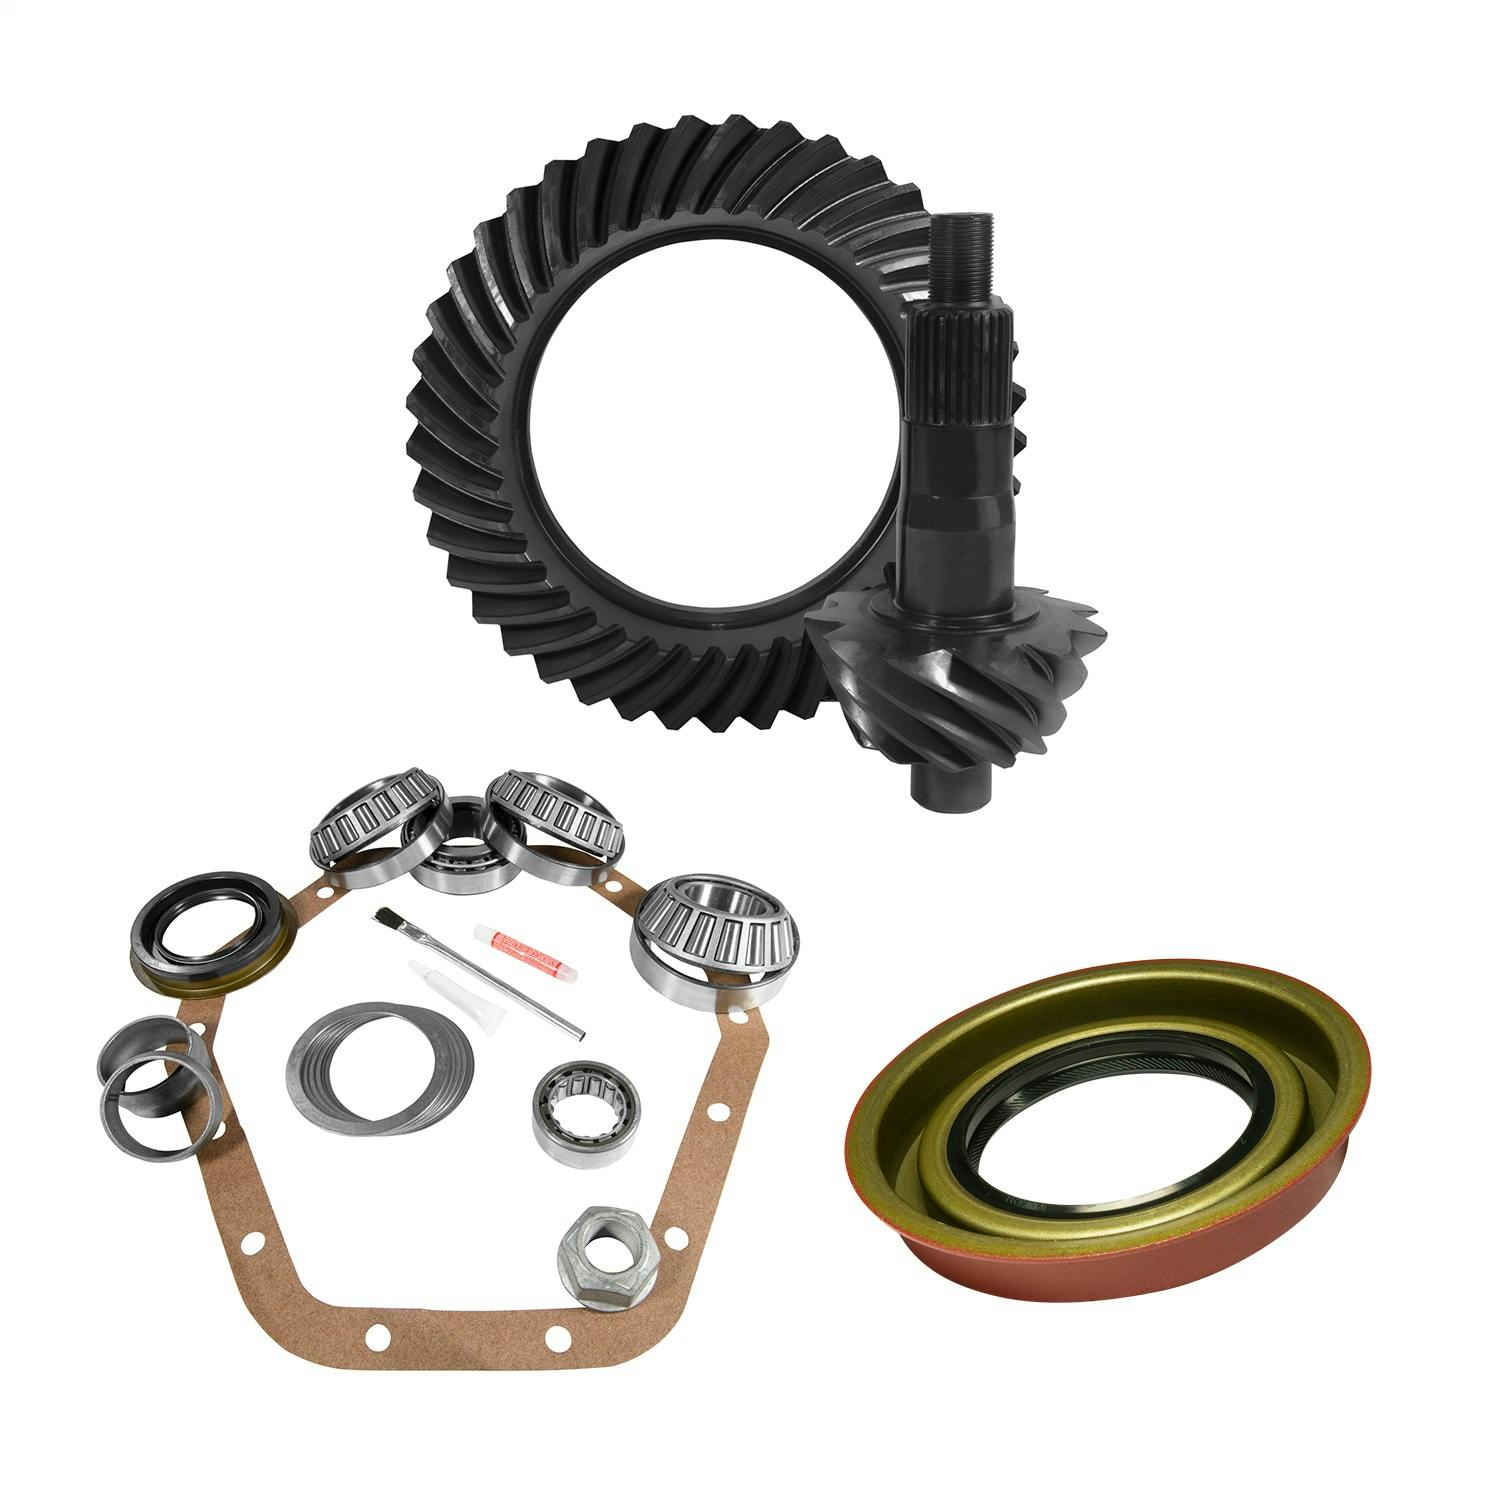 USA Standard Gear ZGK2122 10.5in. GM 14 Bolt 4.88 Thick Rear Ring/Pinion and Install Kit